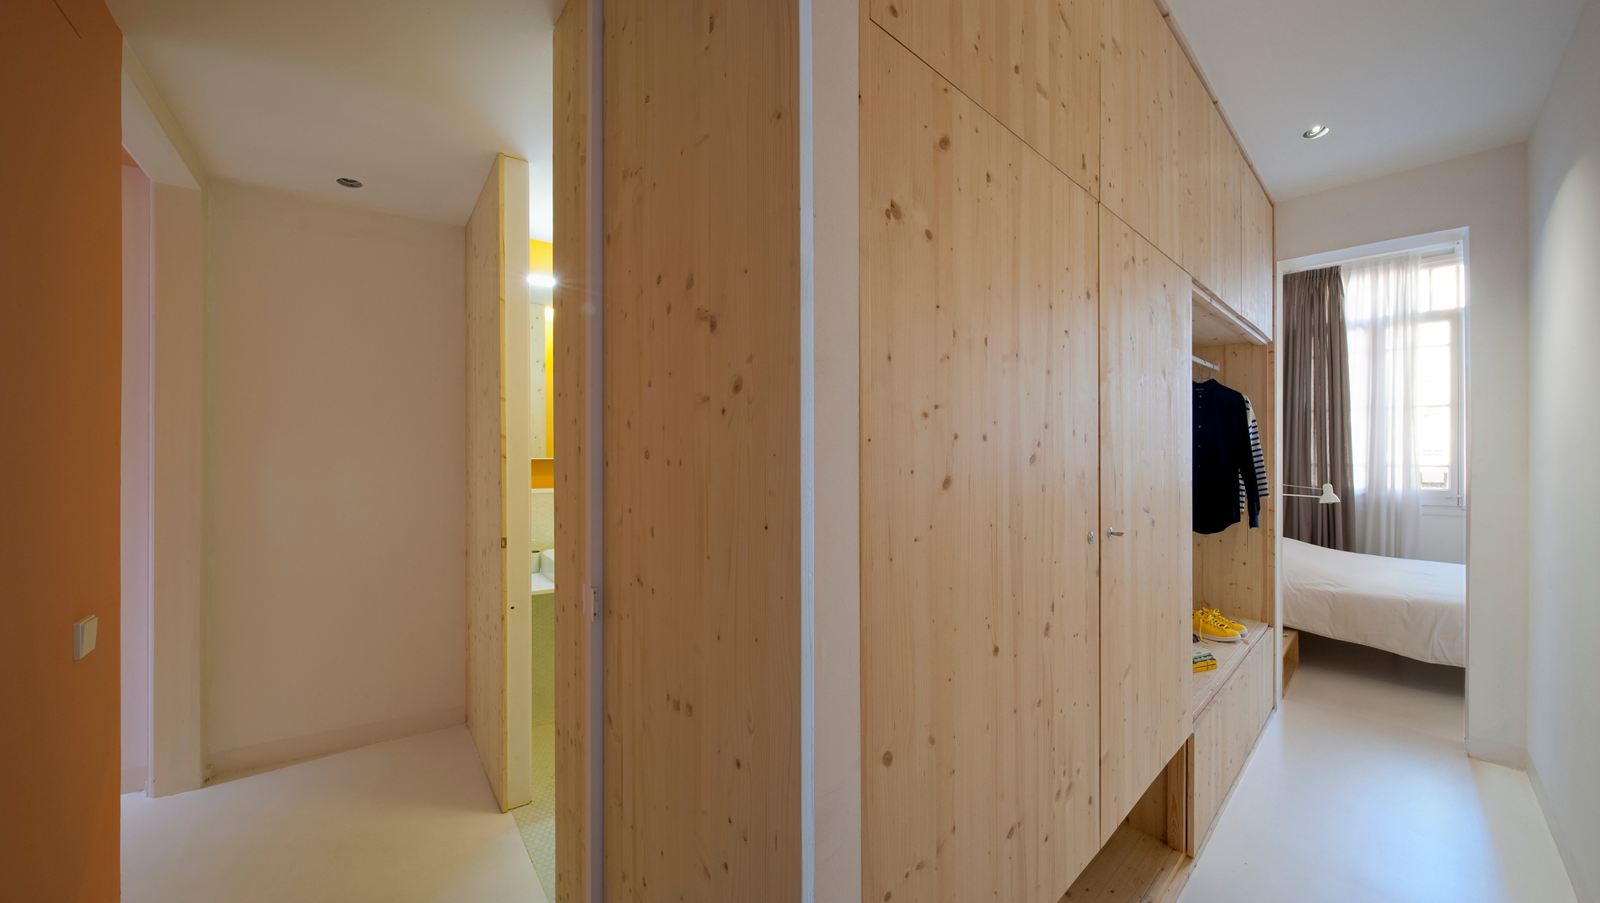 Tyche Apartment in Barcelona, Spain by CaSA Colombo & Serboli Architecture